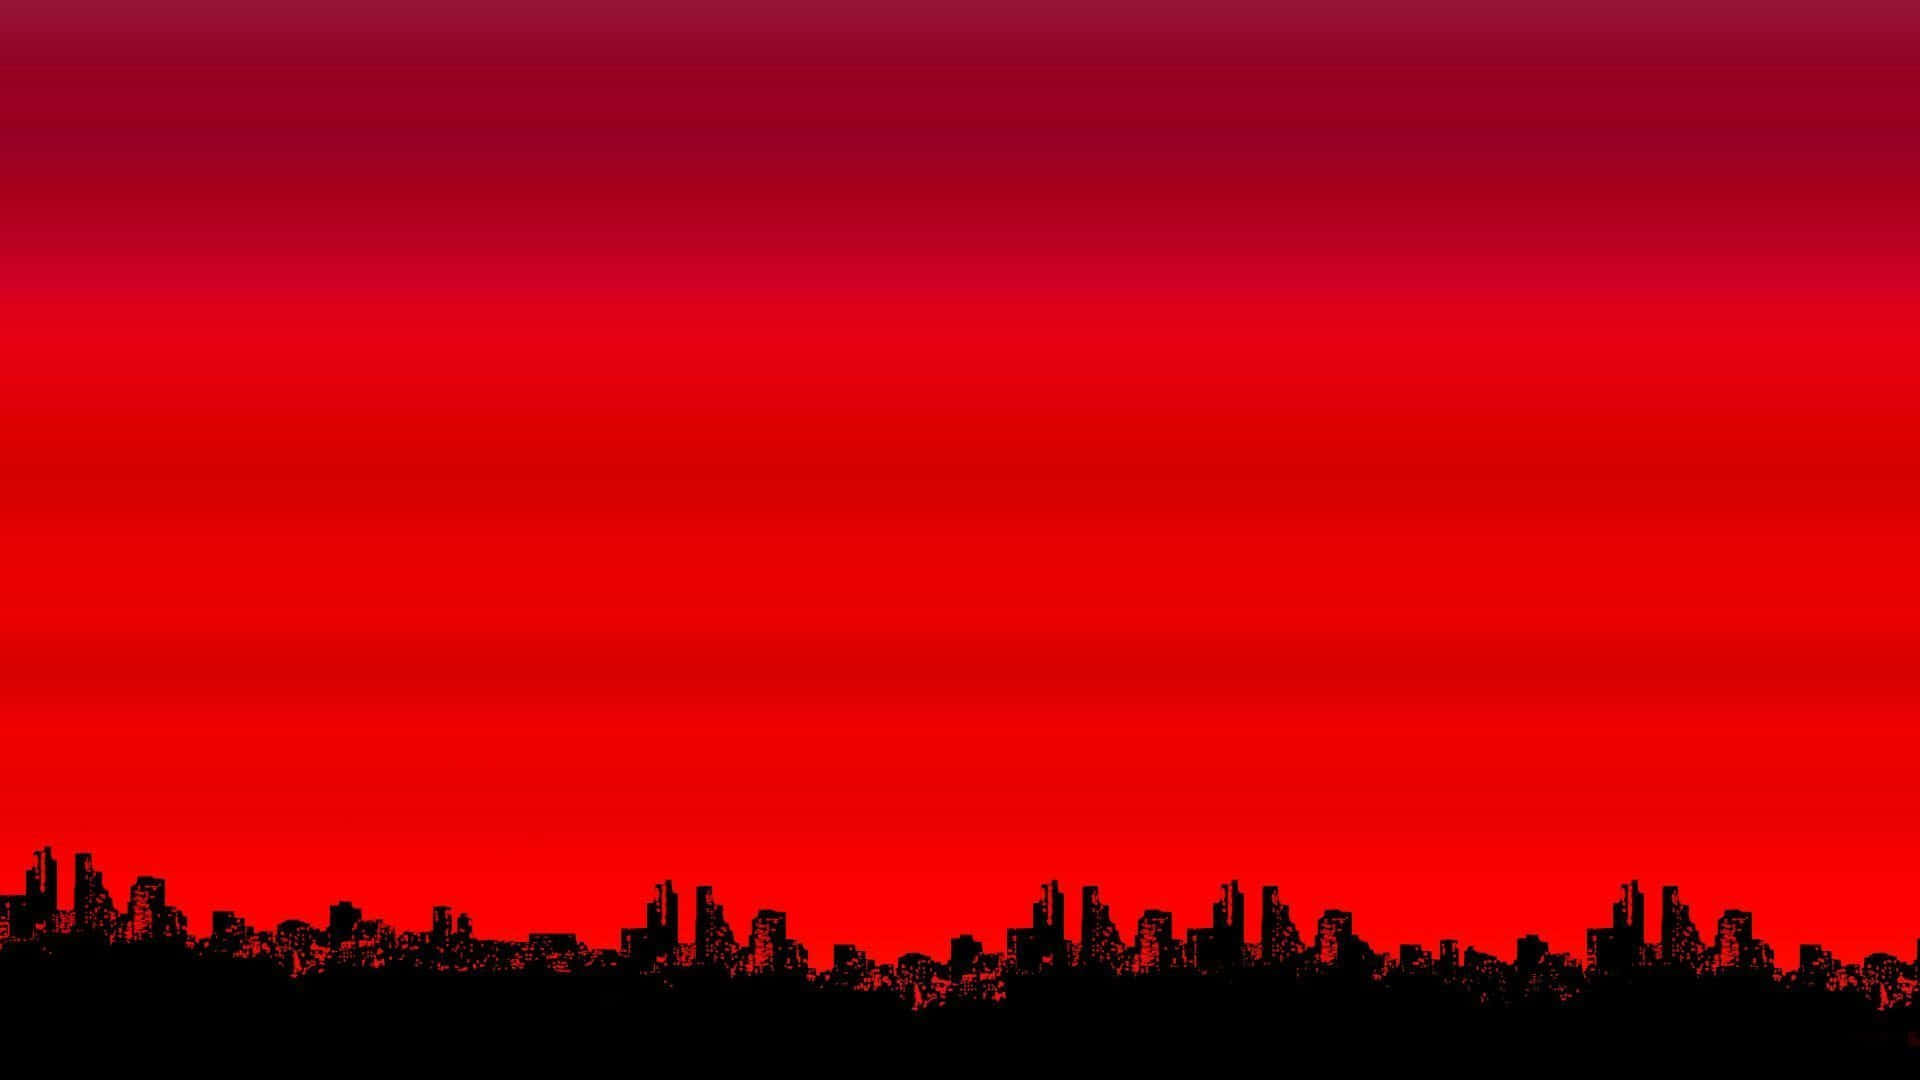 A beautiful red shimmering sunset across the horizon.